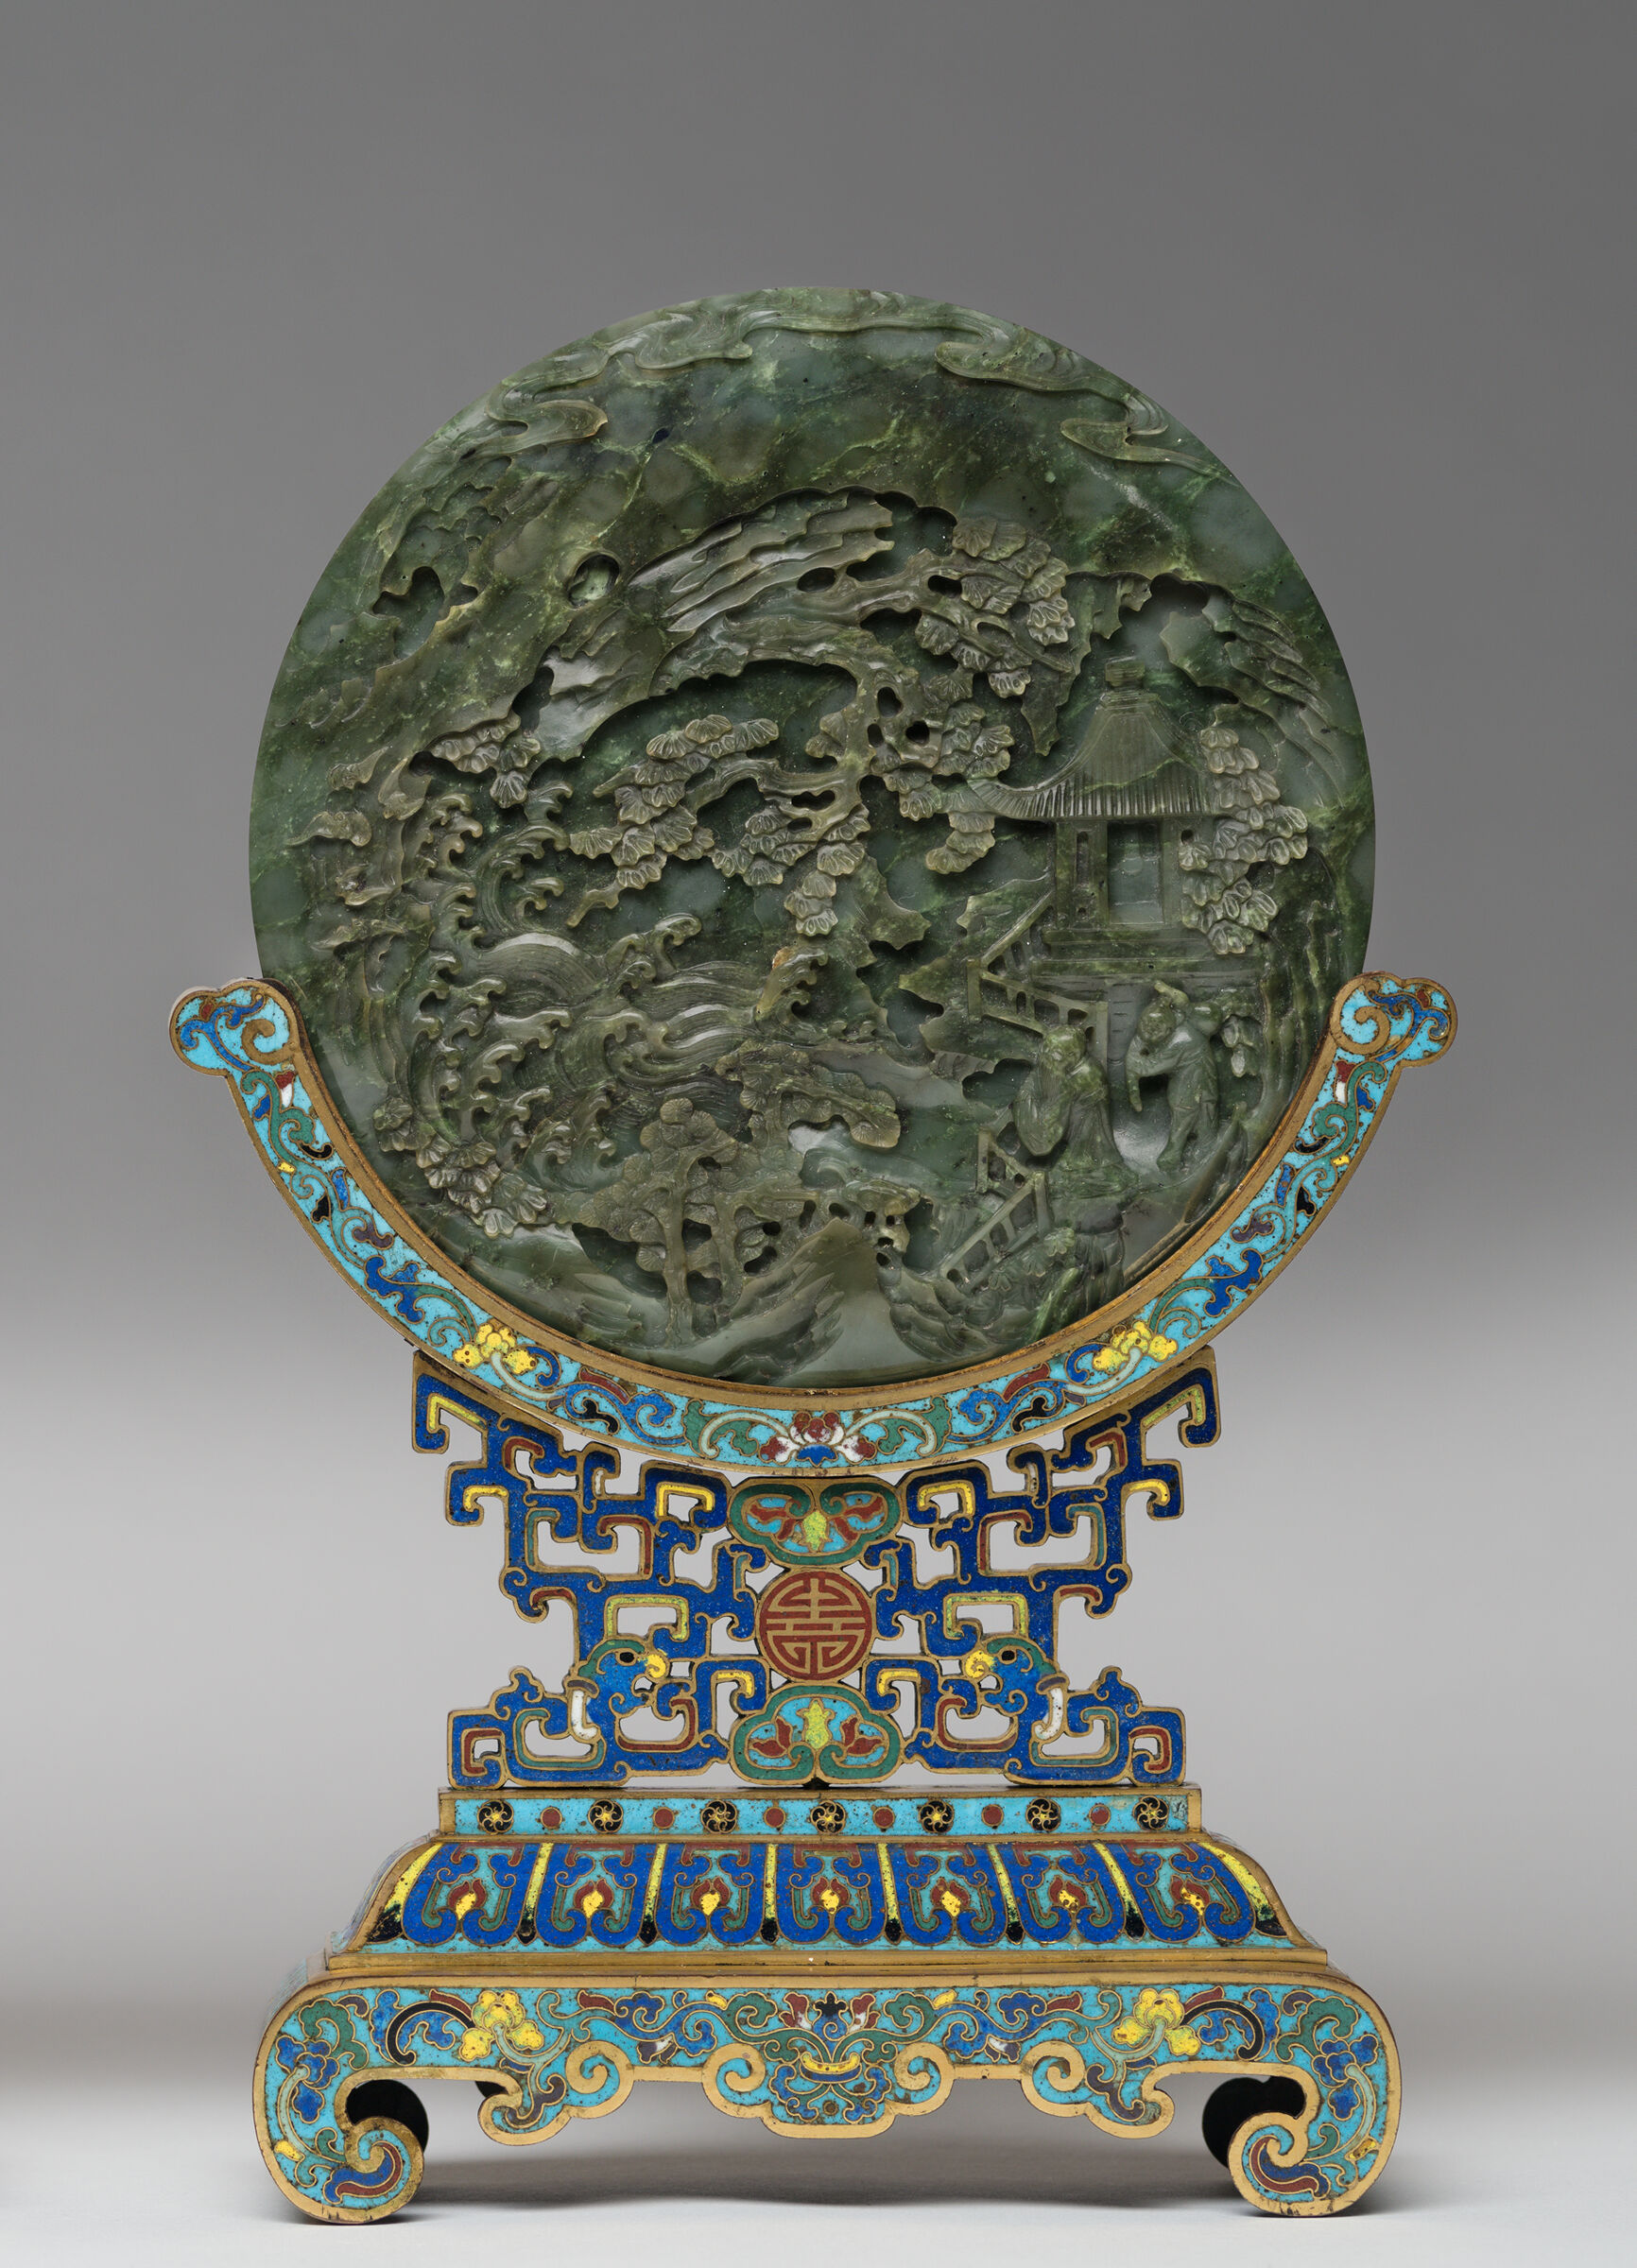 Jade Circular Table Screen With Decoration Of Figures In A Landscape On The Front And Trees And Mountains On The Back, Mounted On A Cloisonné Stand